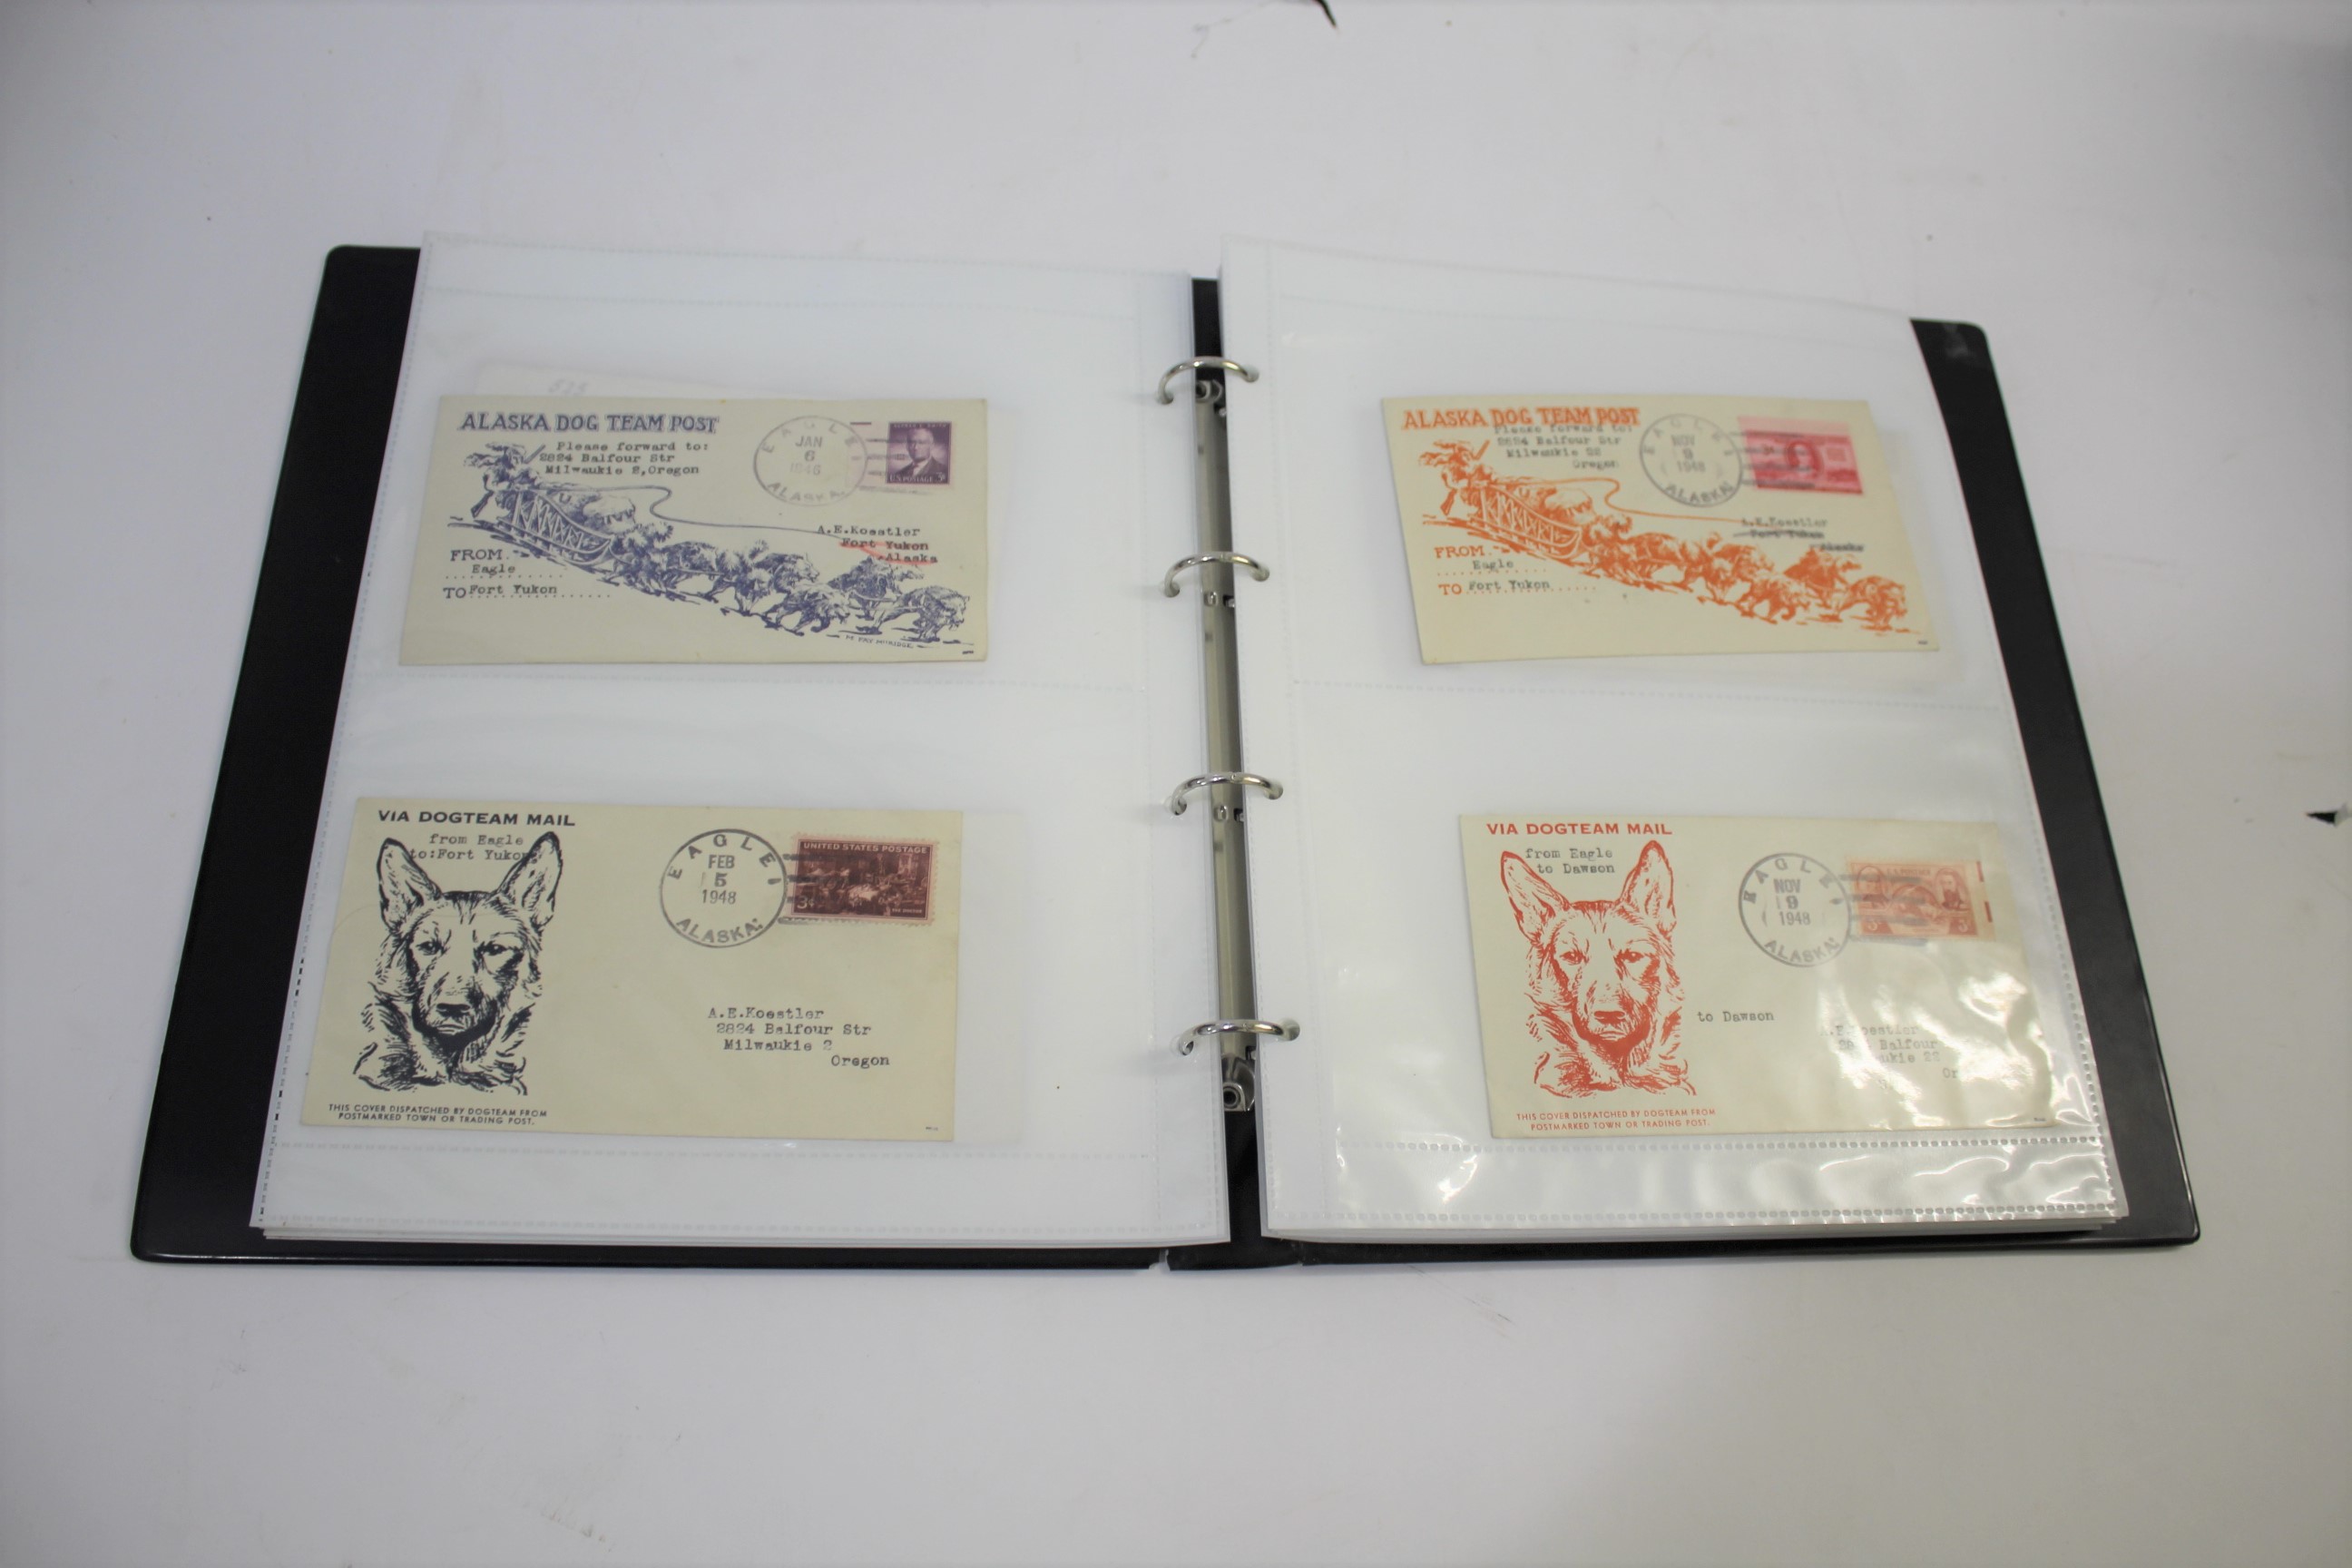 STAMP COLLECTION a mixed lot including 3 albums of Alaska Covers from the 1940's to 1960's (